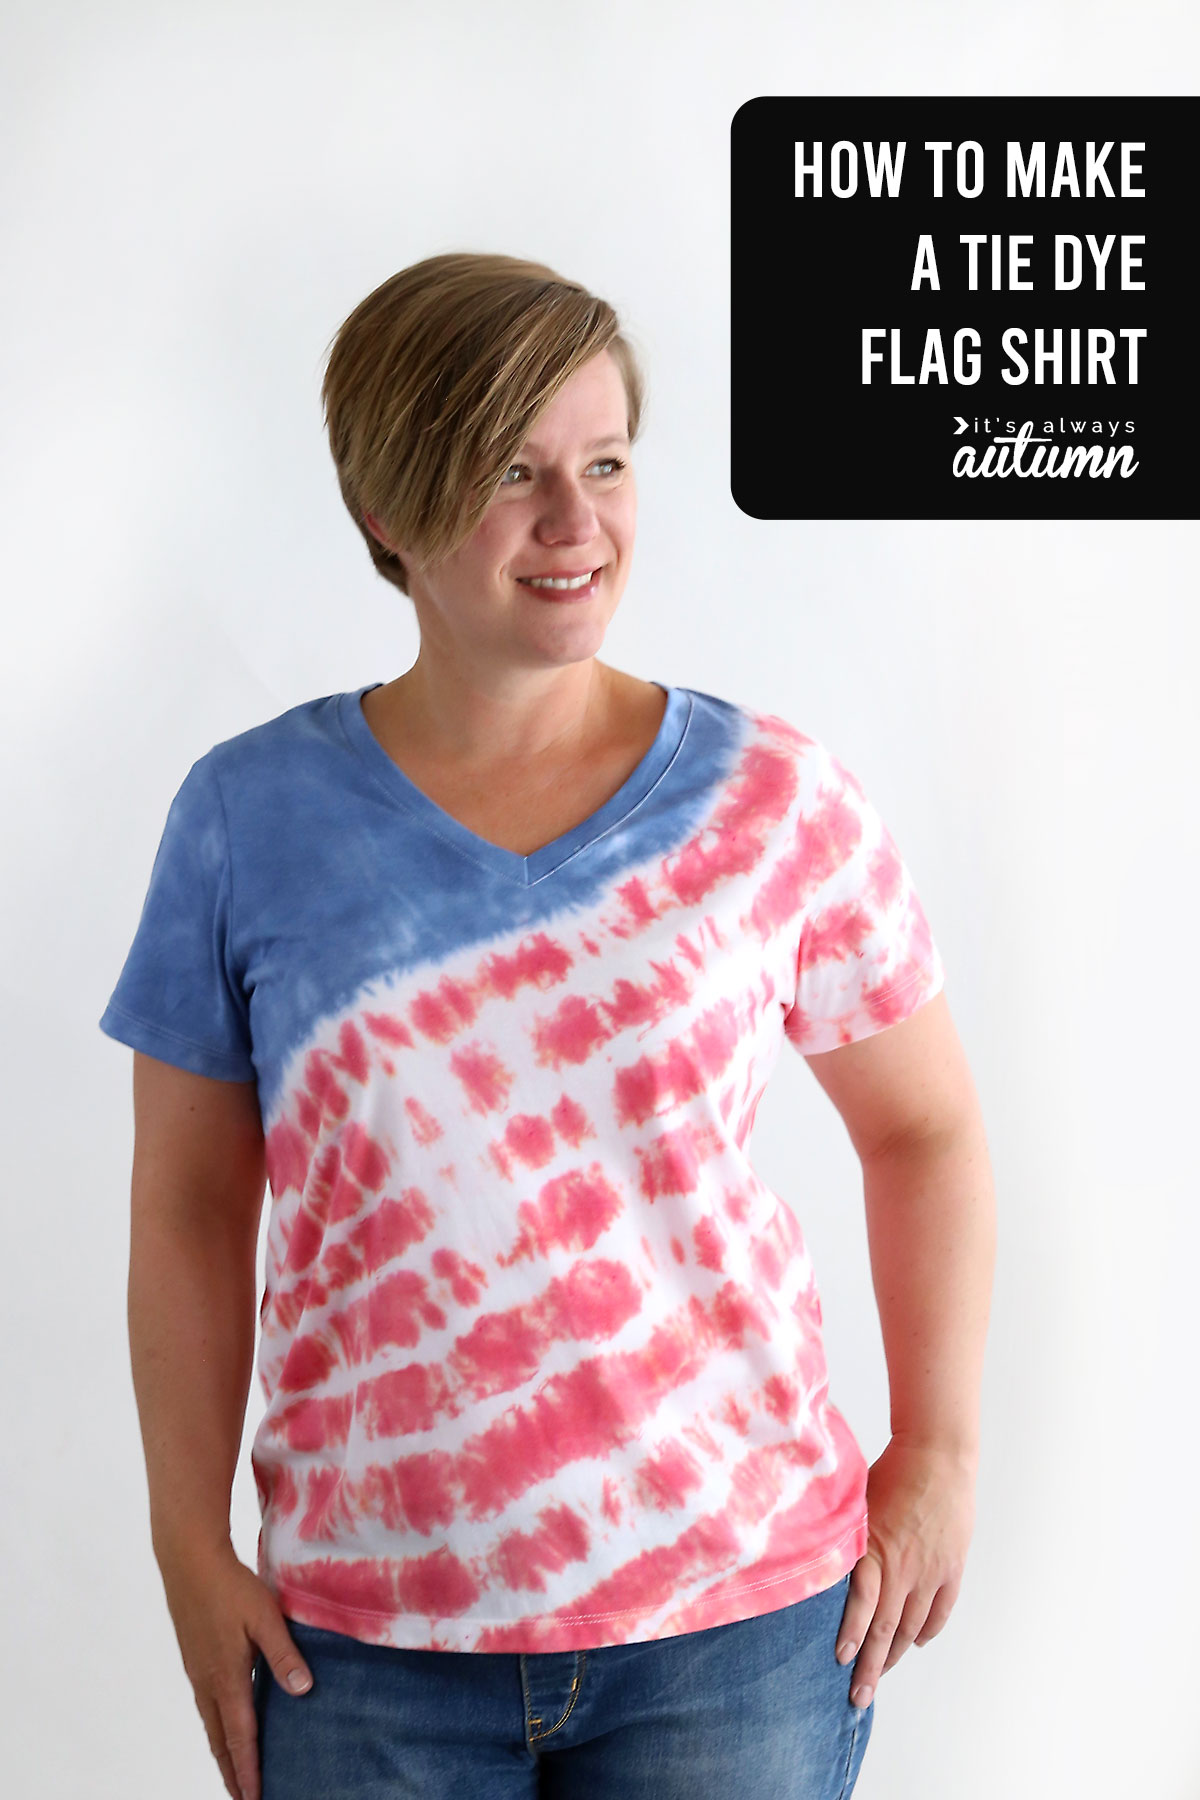 Red white and blue flag inspired tie dye shirt with sunglasses and flip flops